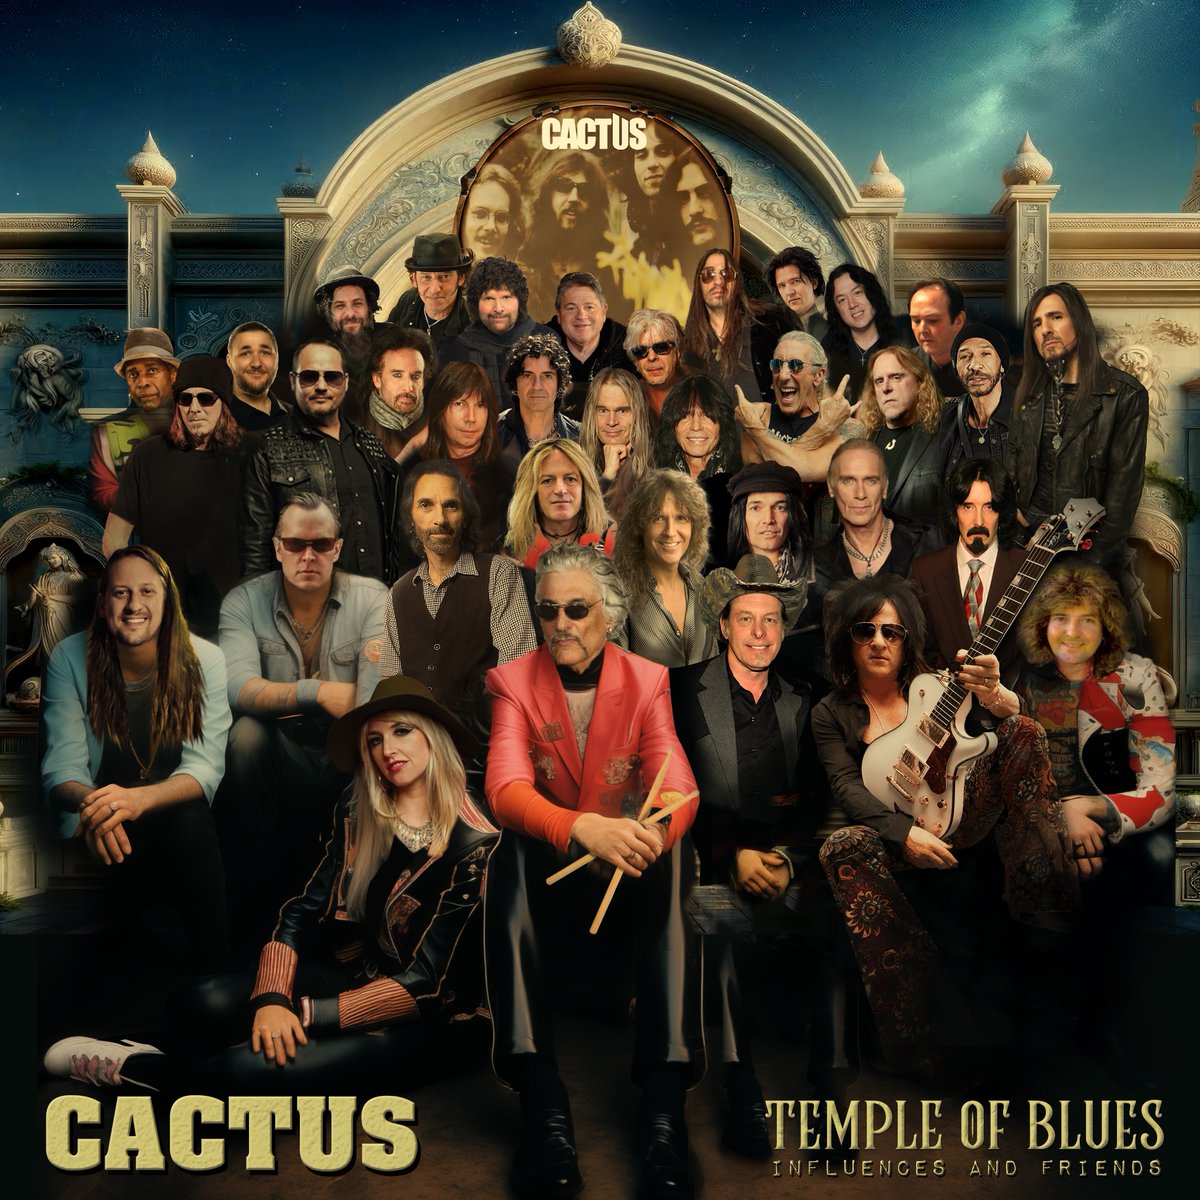 Do you like the band Cactus? Listen to the new Cactus track with Dee Snider of Twisted Sister and Dug Pinnick of King’s X. Click here: tinyurl.com/4p4p2d9a It’s all part of an all-star tribute to the band.